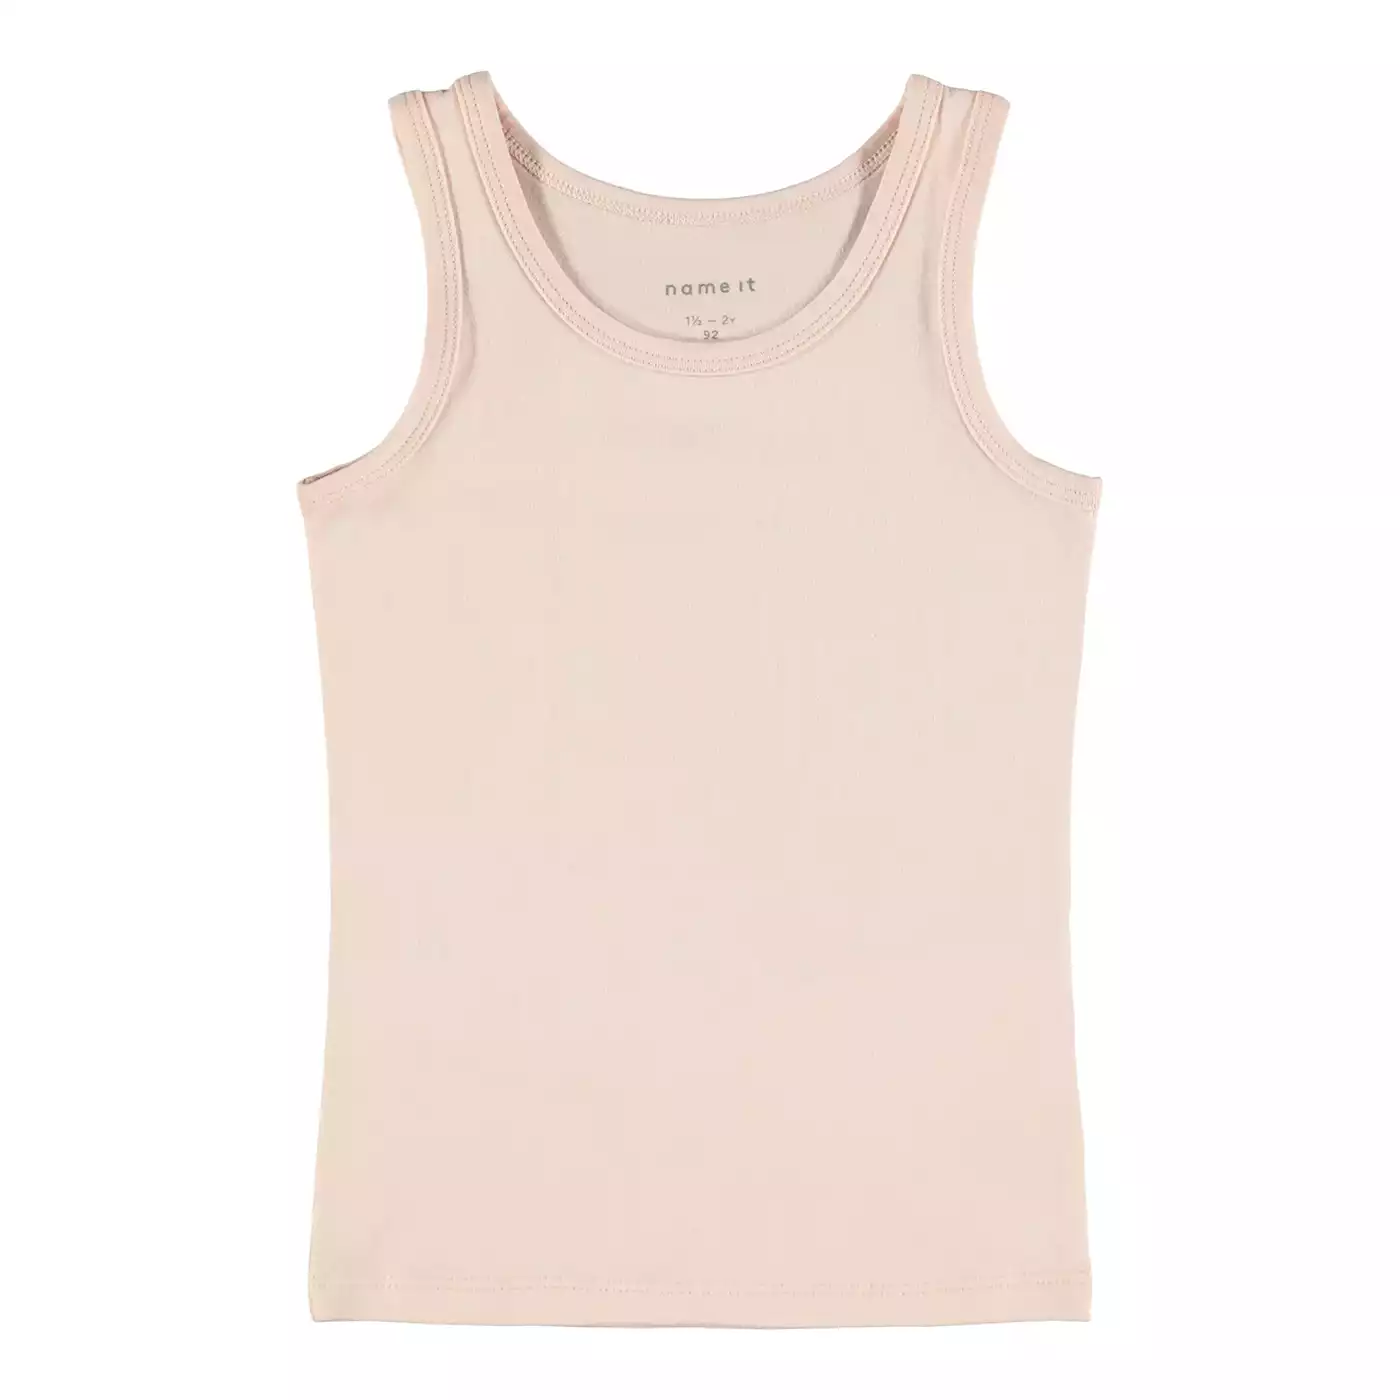 2er-Pack Tank Top name it Pink Rosa M2008579751109 6